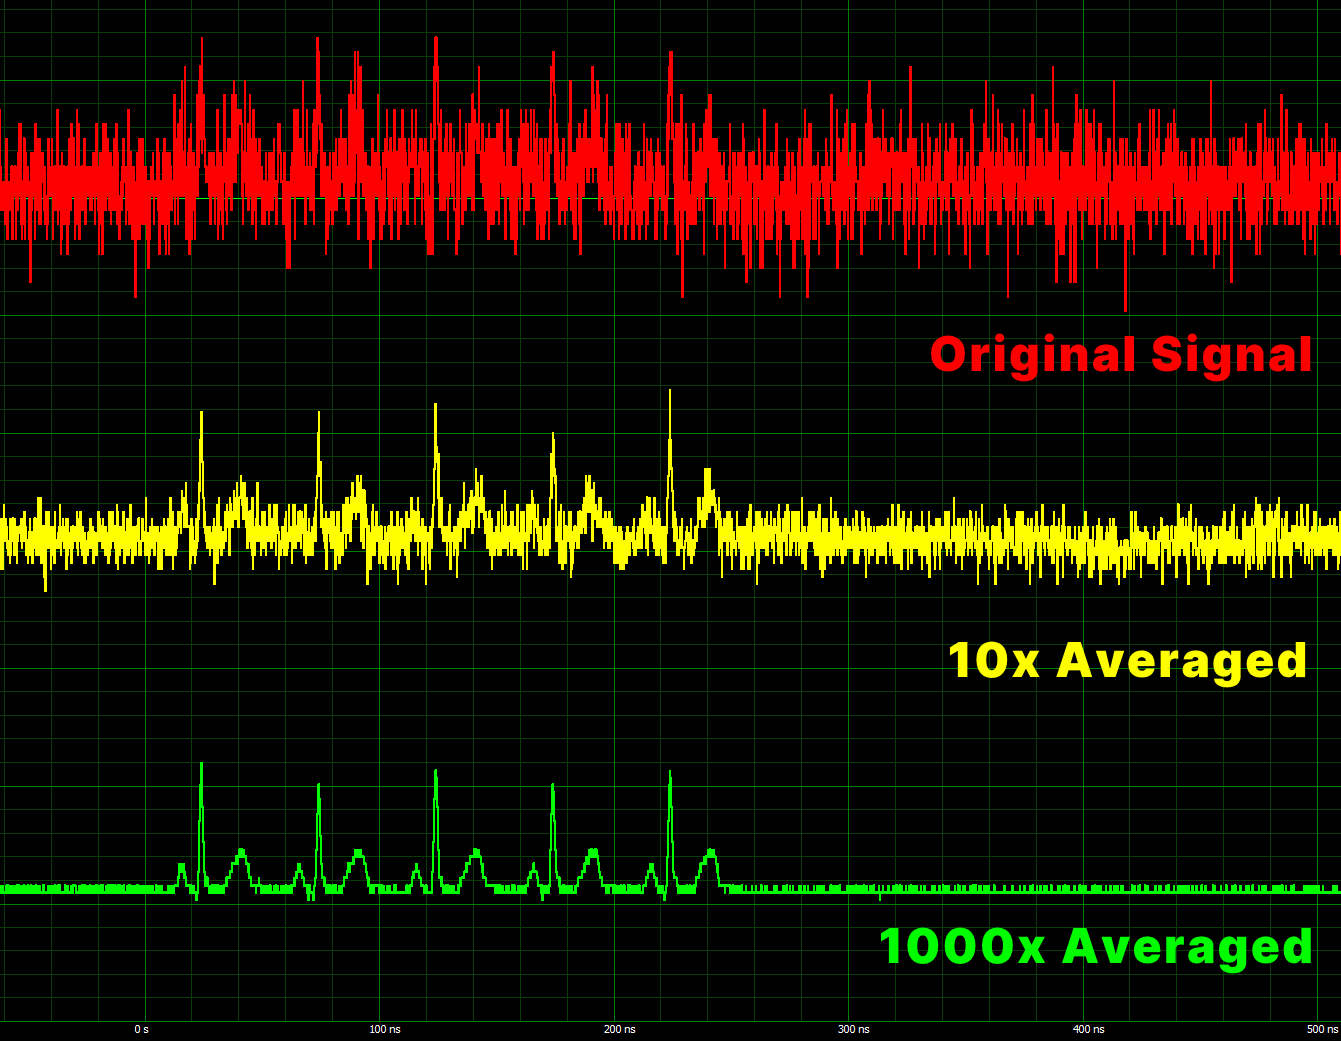 Example of Signal Averaging with Original, 10x and 1000x Average